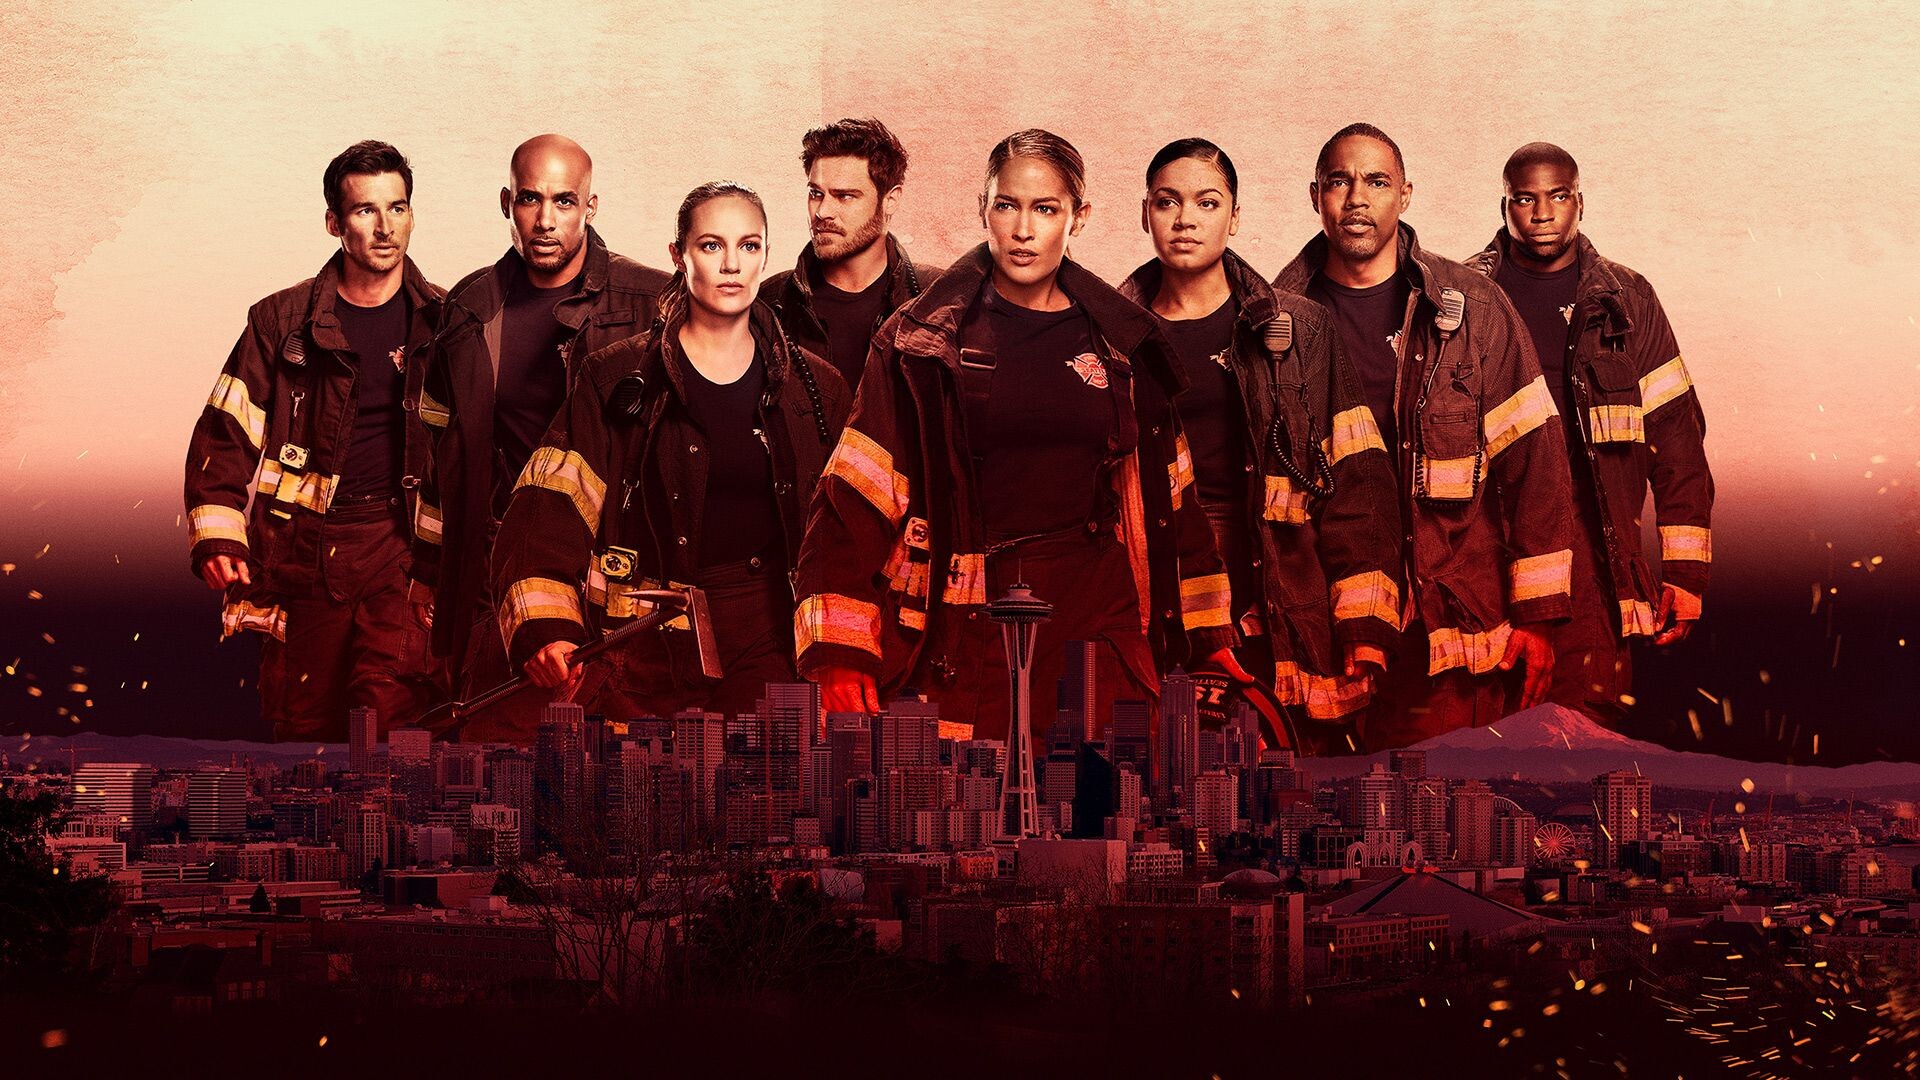 Station 19 (TV Series): Сity Fire Department On Duty, Fireproof Uniform, Rescue Service, Team Of Firefighters. 1920x1080 Full HD Wallpaper.